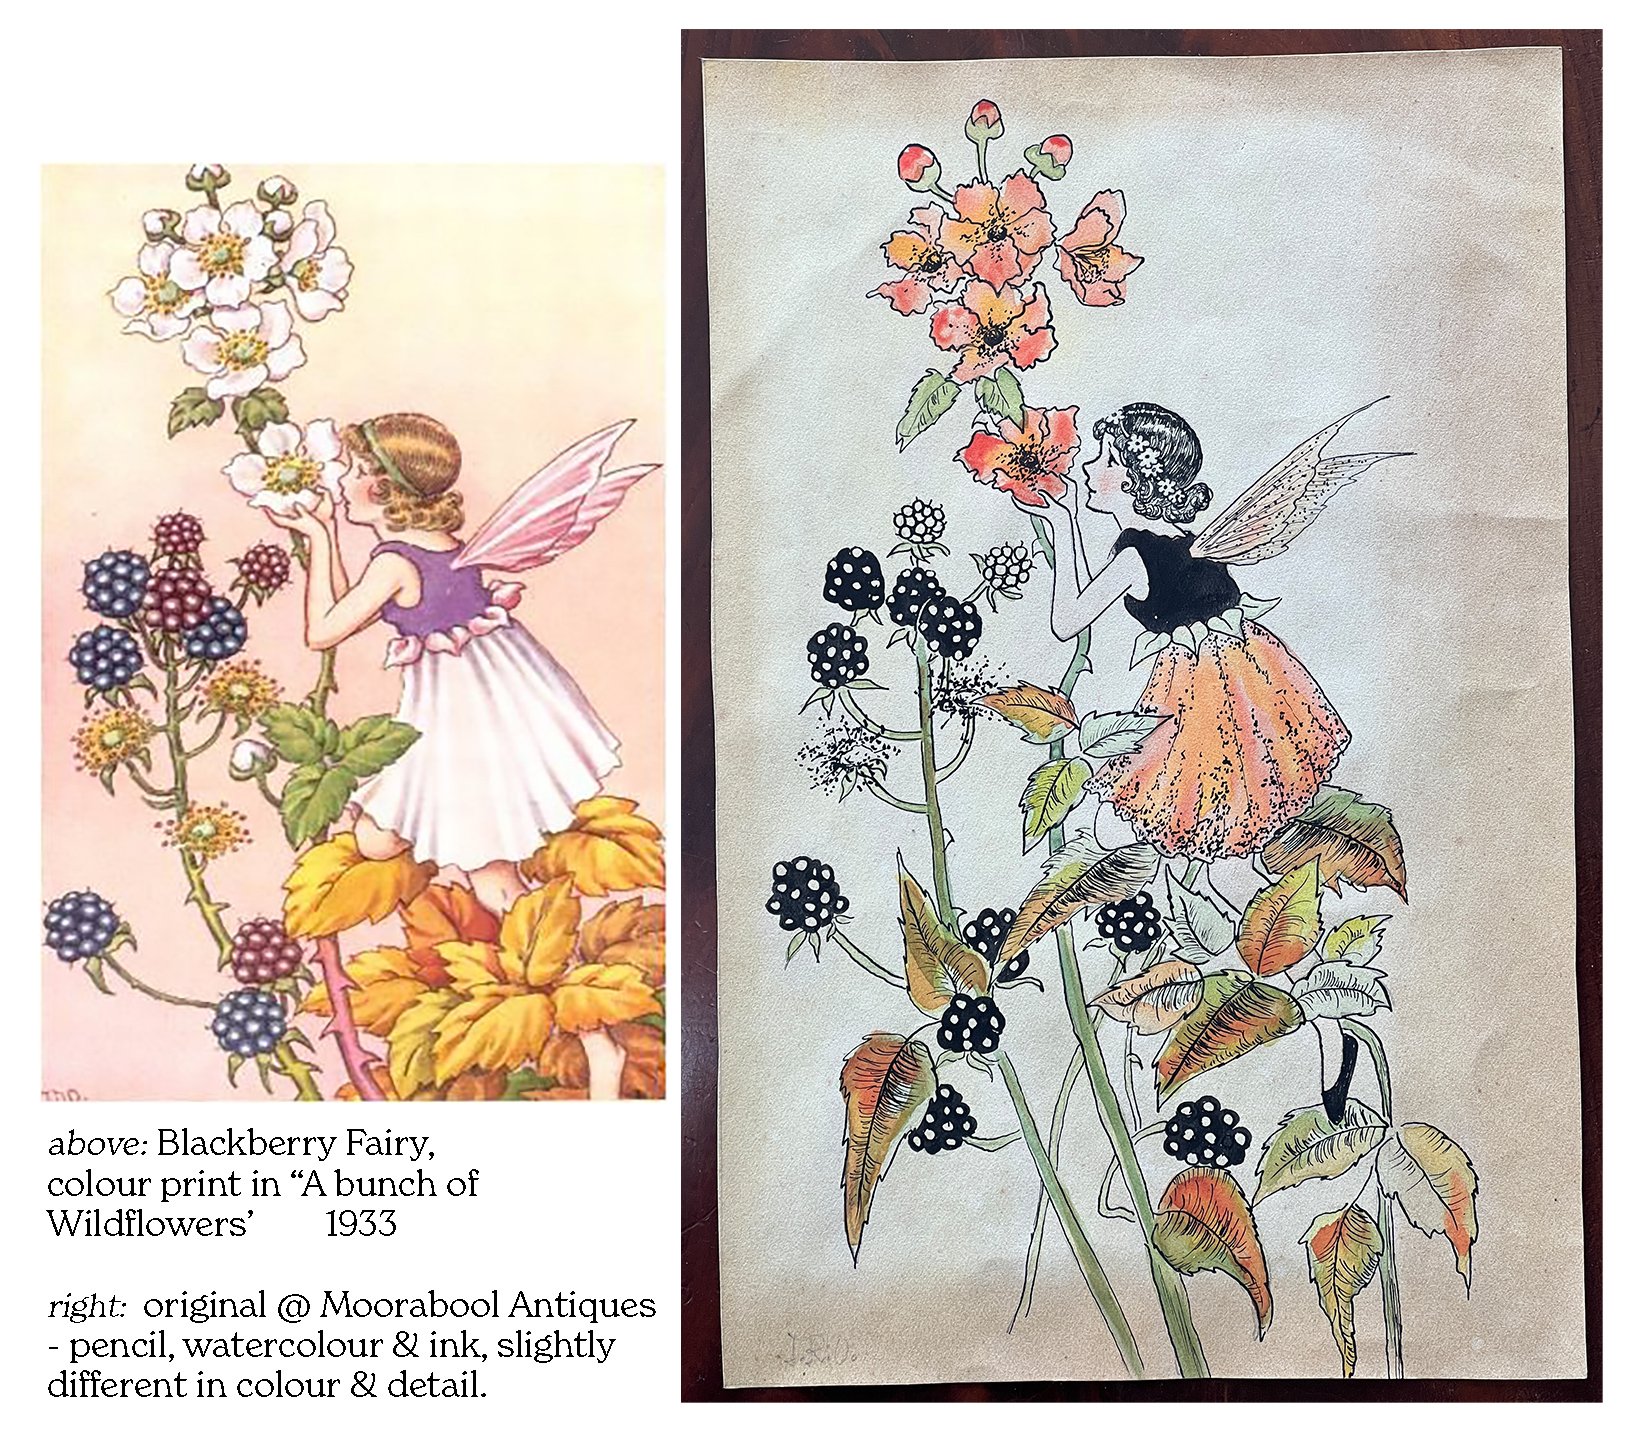 Ida Rentoul Outhwaite's 'Blackberry Fairy' from 'A bunch of wildflowers' 1933 - with original signed sketch